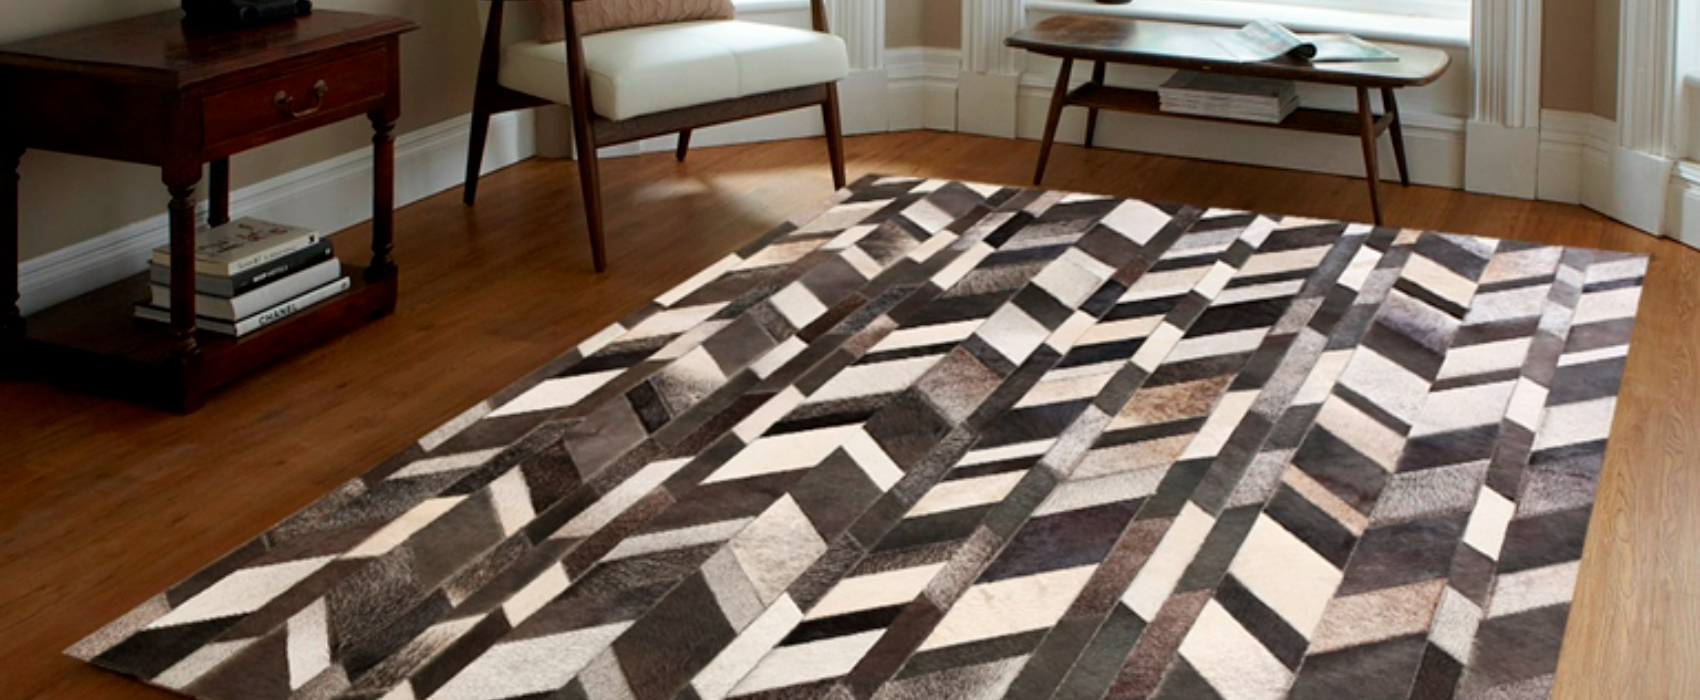 Handmade Leather Carpet Rugs Exporters Manufacturers India, Suppliers ...